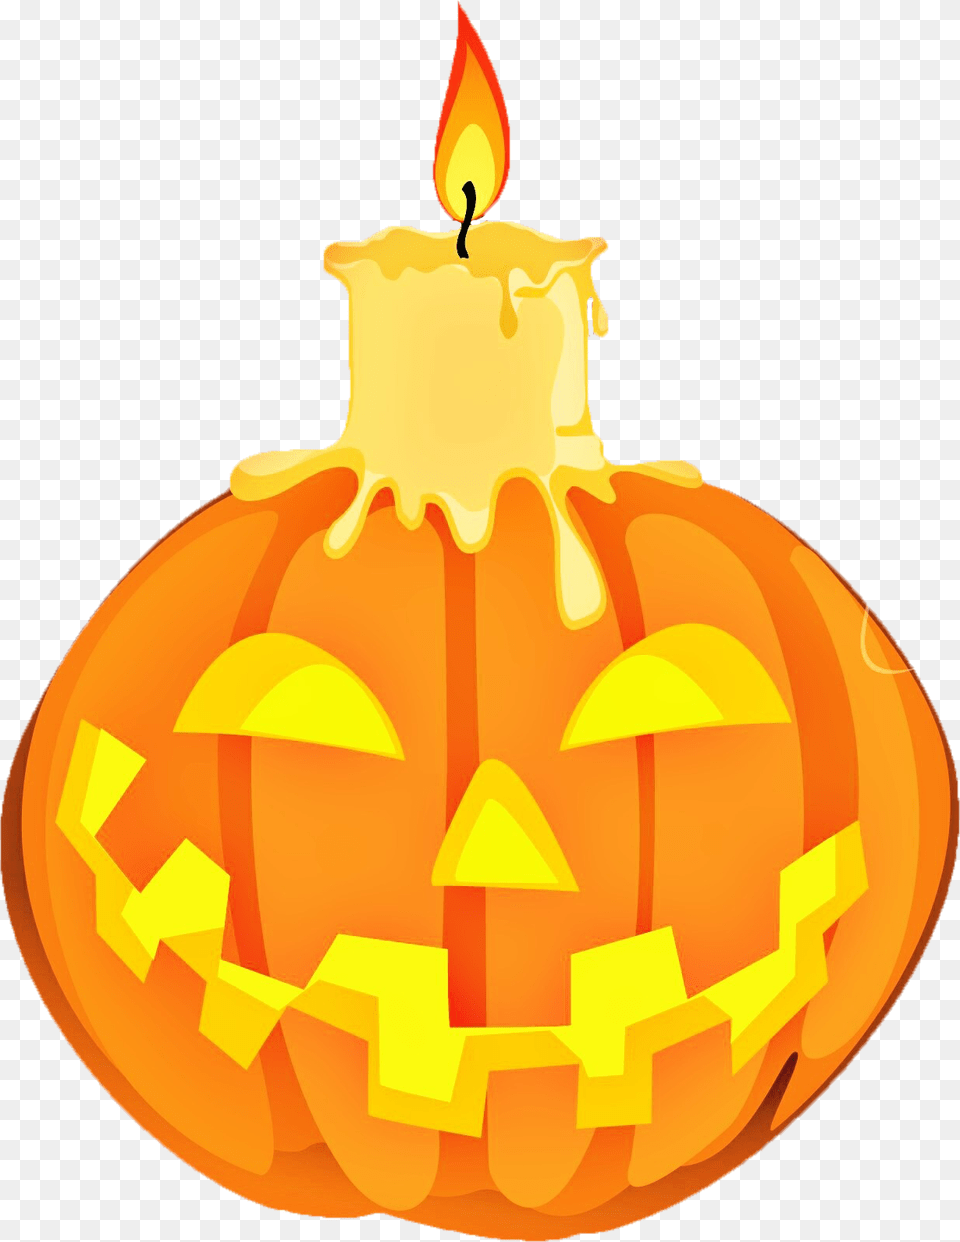 Halloween, Festival, Cutlery, Fork, Birthday Cake Png Image